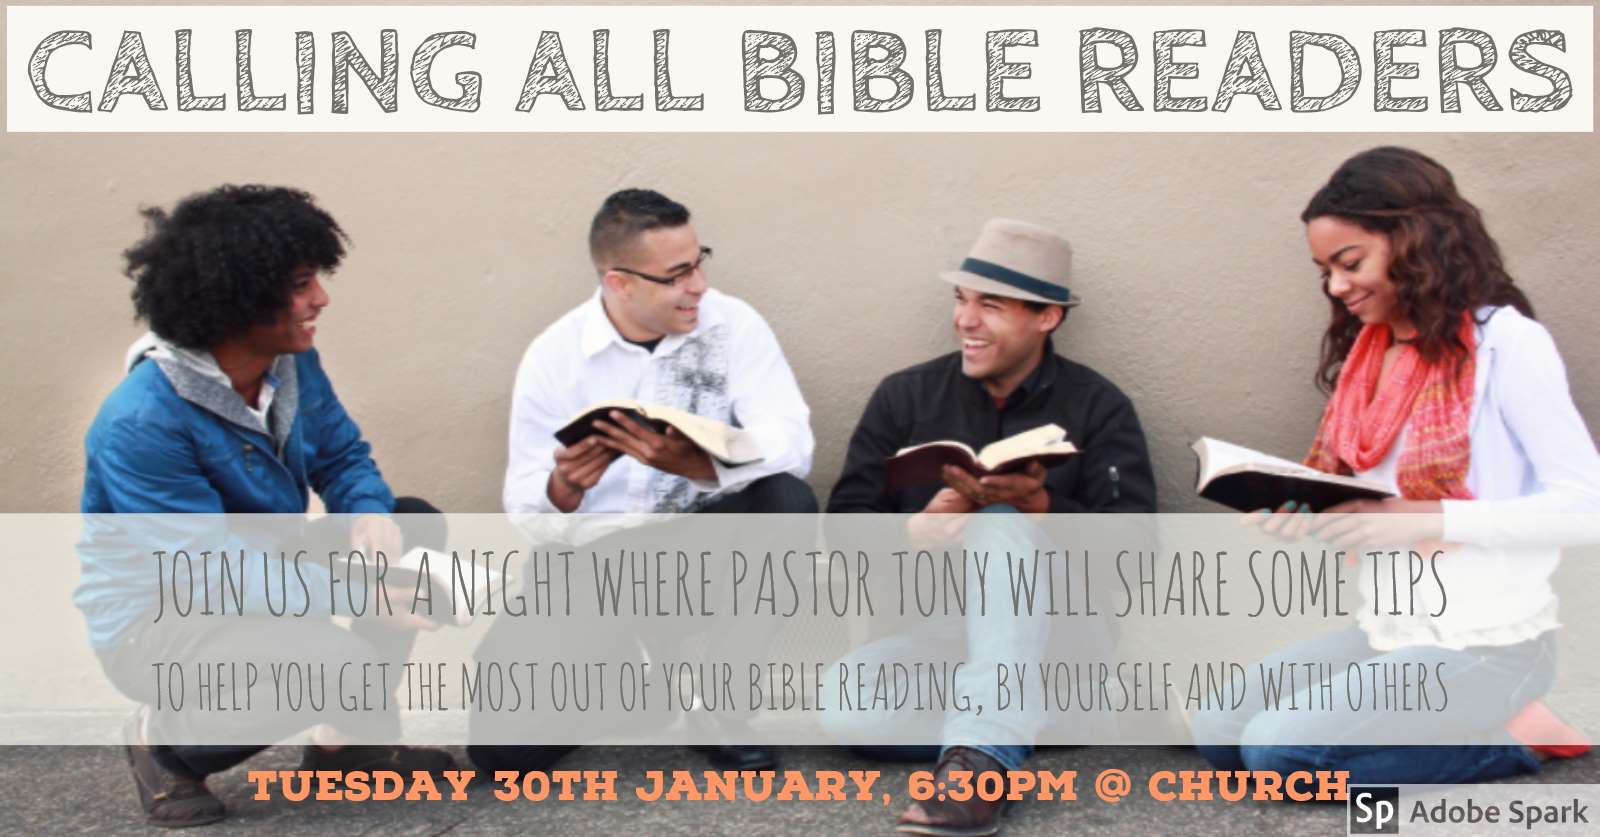 Calling-all-bible-readers